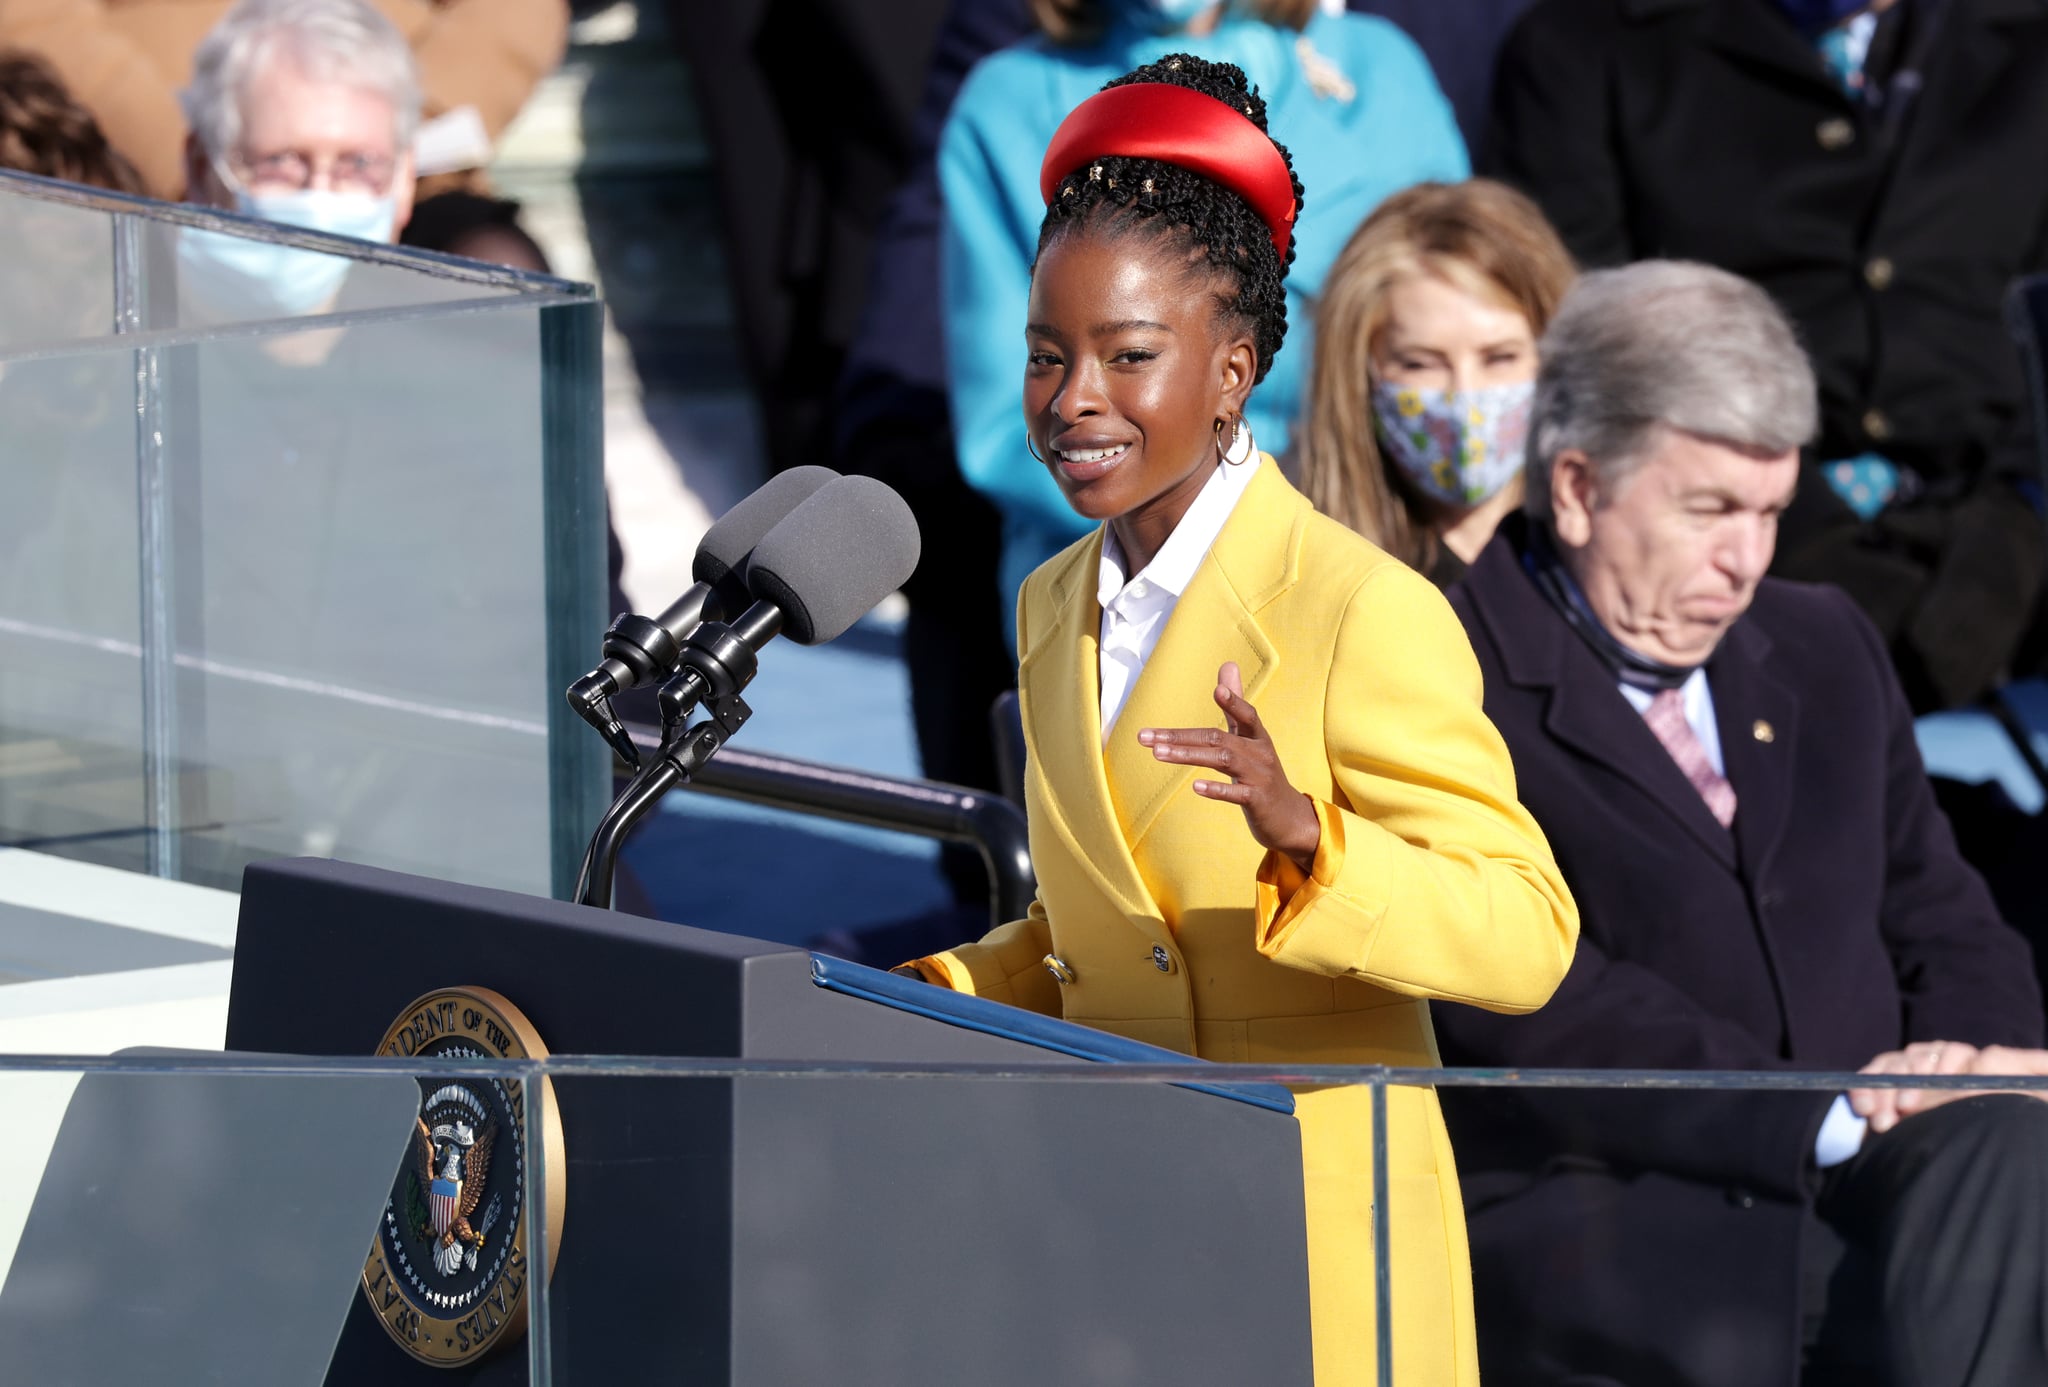 WASHINGTON, DC - JANUARY 20: Youth Poet Laureate Amanda Gorman speaks at the inauguration of U.S. President Joe Biden on the West Front of the U.S. Capitol on January 20, 2021 in Washington, DC.  During today's inauguration ceremony Joe Biden becomes the 46th president of the United States. (Photo by Alex Wong/Getty Images)